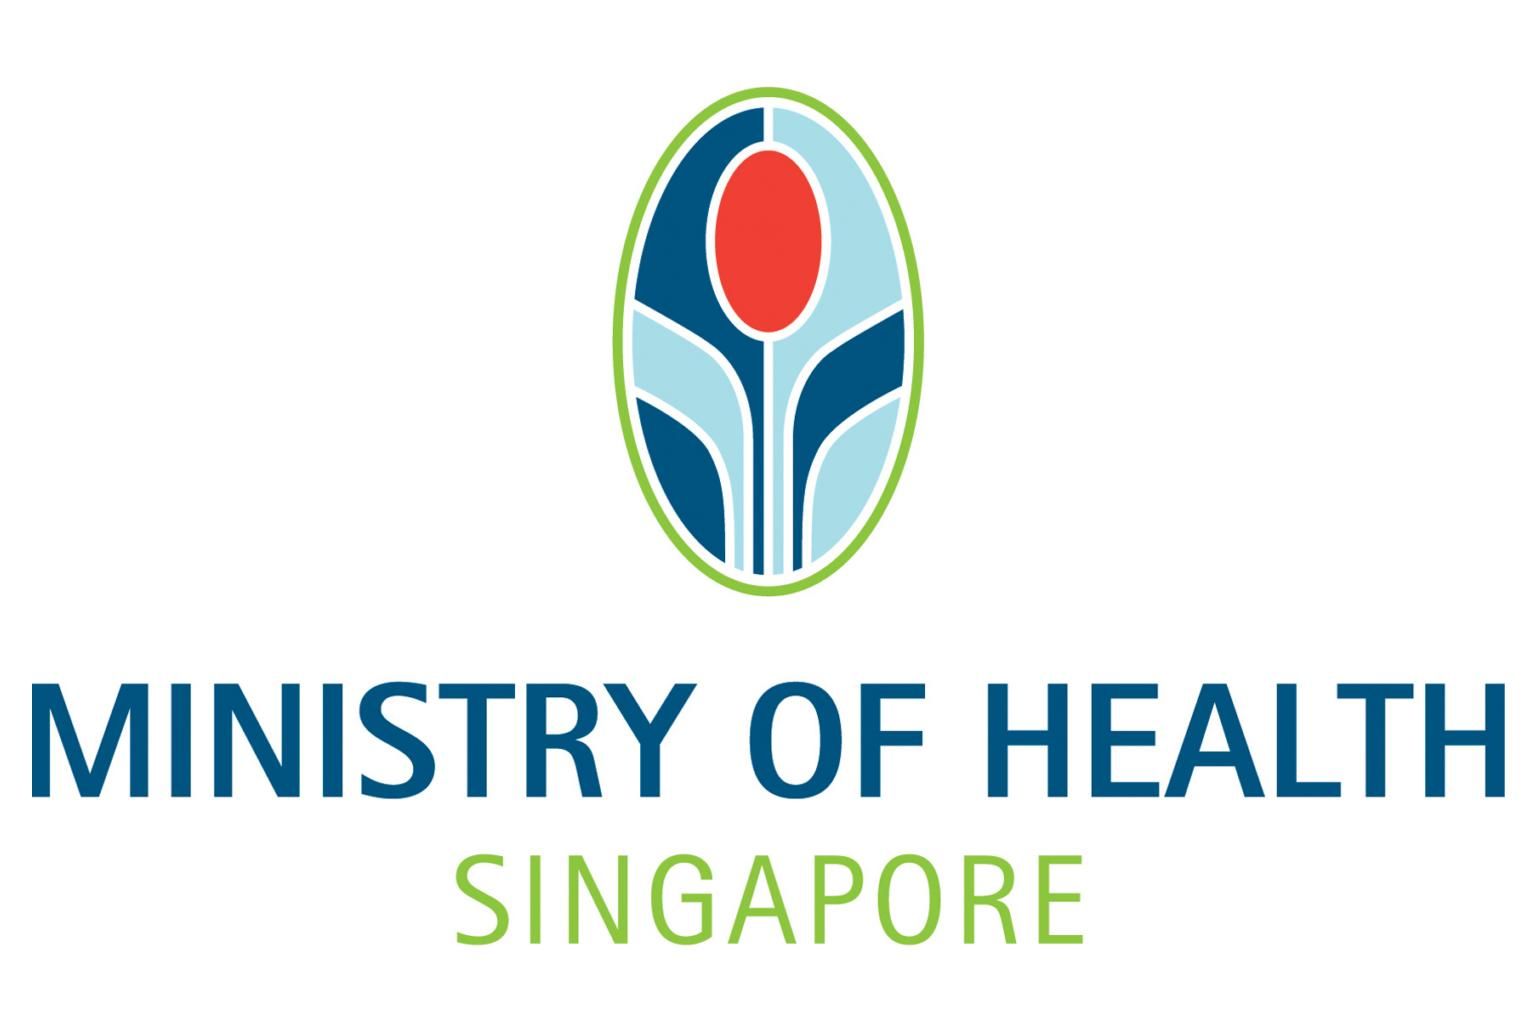 Singapore Ministry of Health announced travelers from Norway and Estonia require to stay at dedicated SHN fecilities from 8 Nov